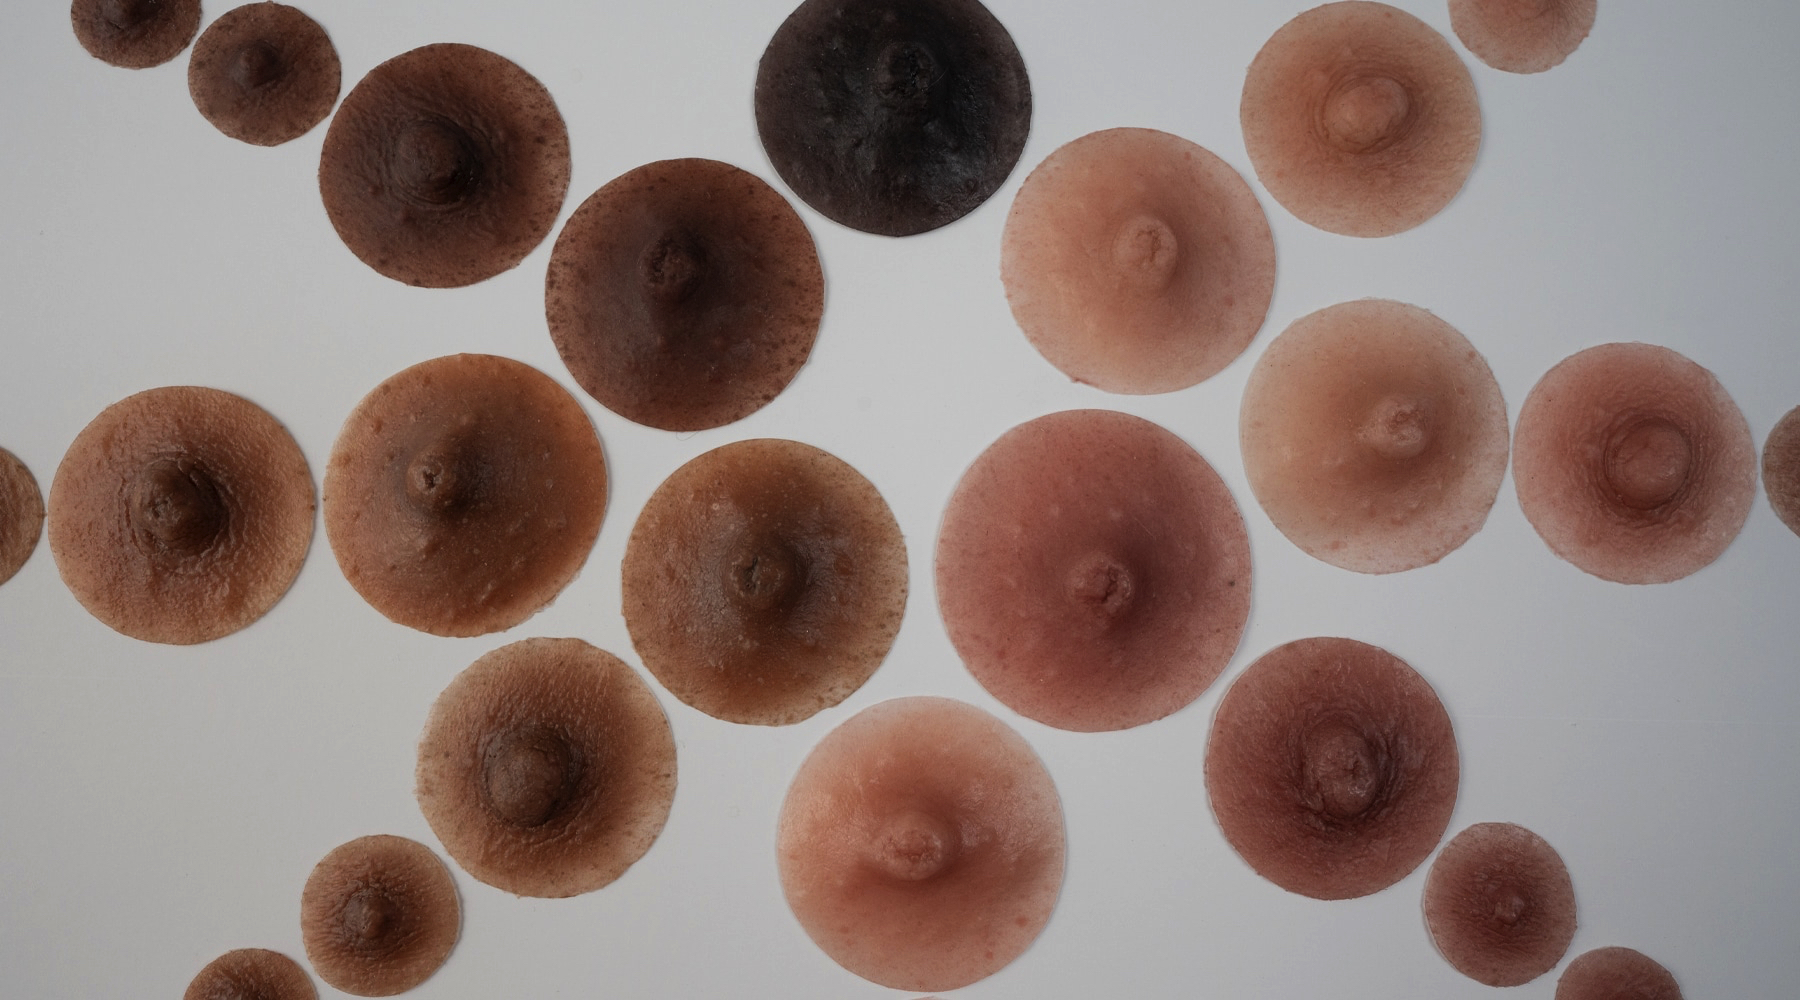 An array of nipples in multiple sizes and colors